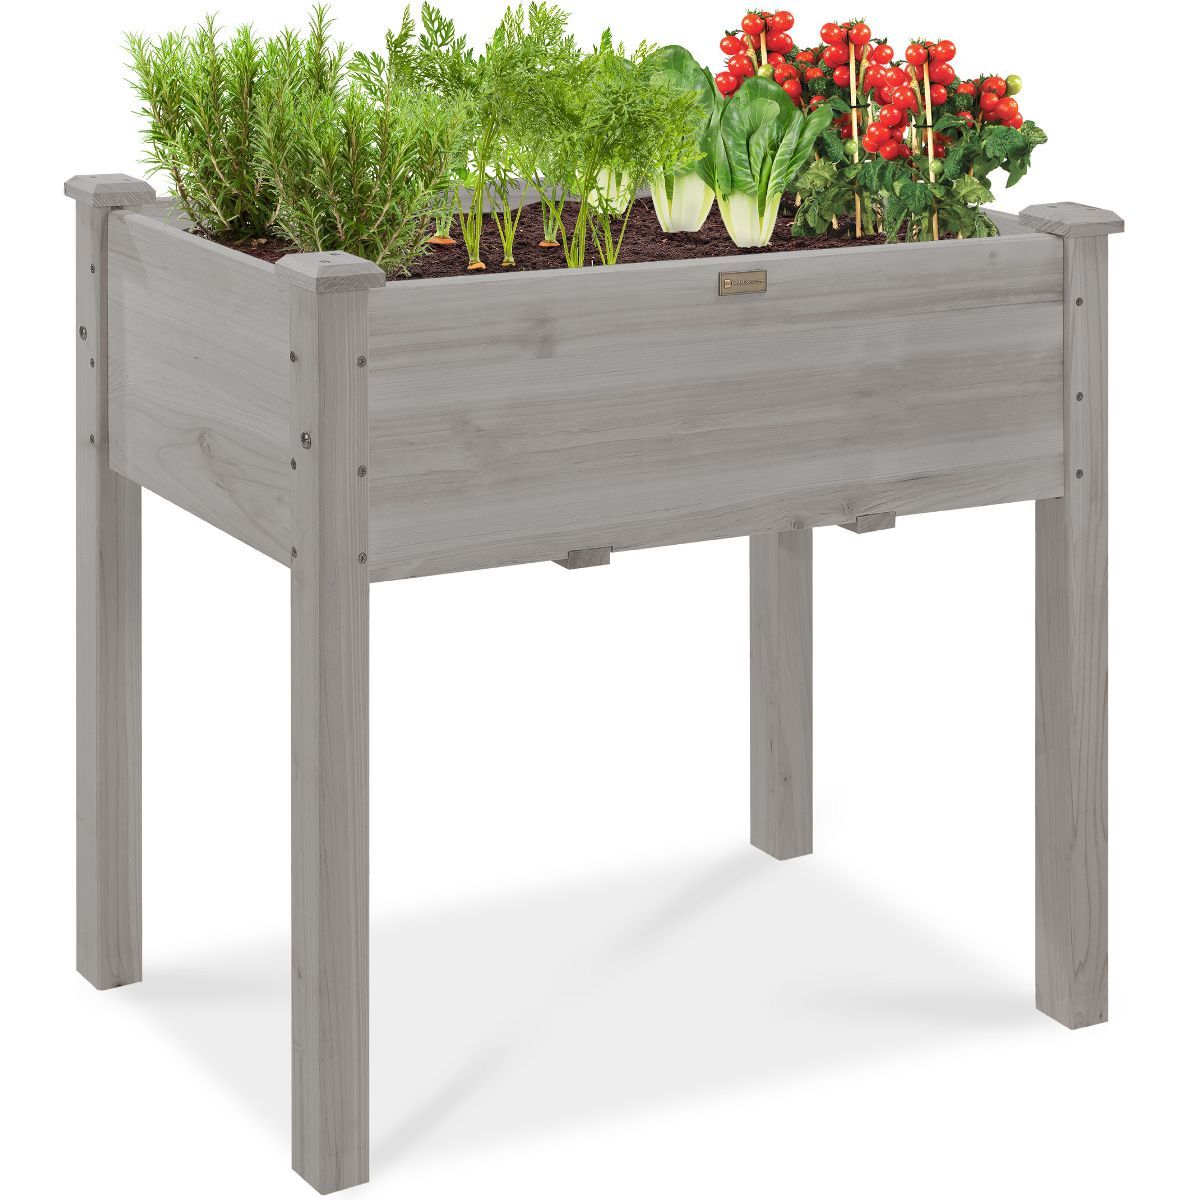 Best Choice Products 34x18x30in Raised Garden Bed, Elevated Wood Planter Box for Kids, Patio w/ B... | Target